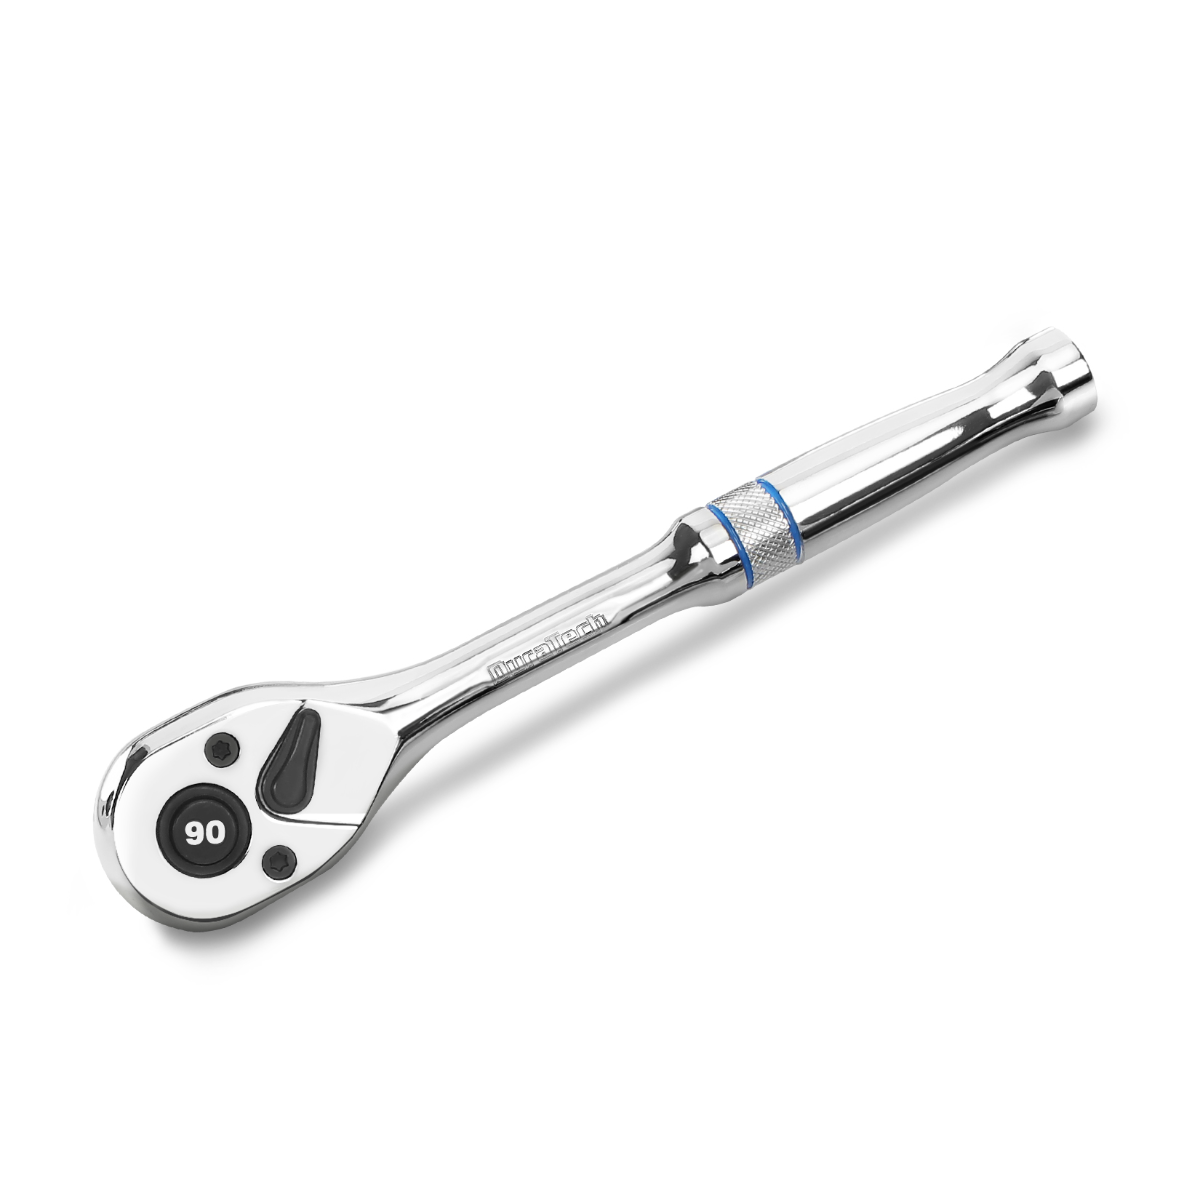 DURATECH 1/2, 1/4, 3/8-Inch Drive Socket Wrench